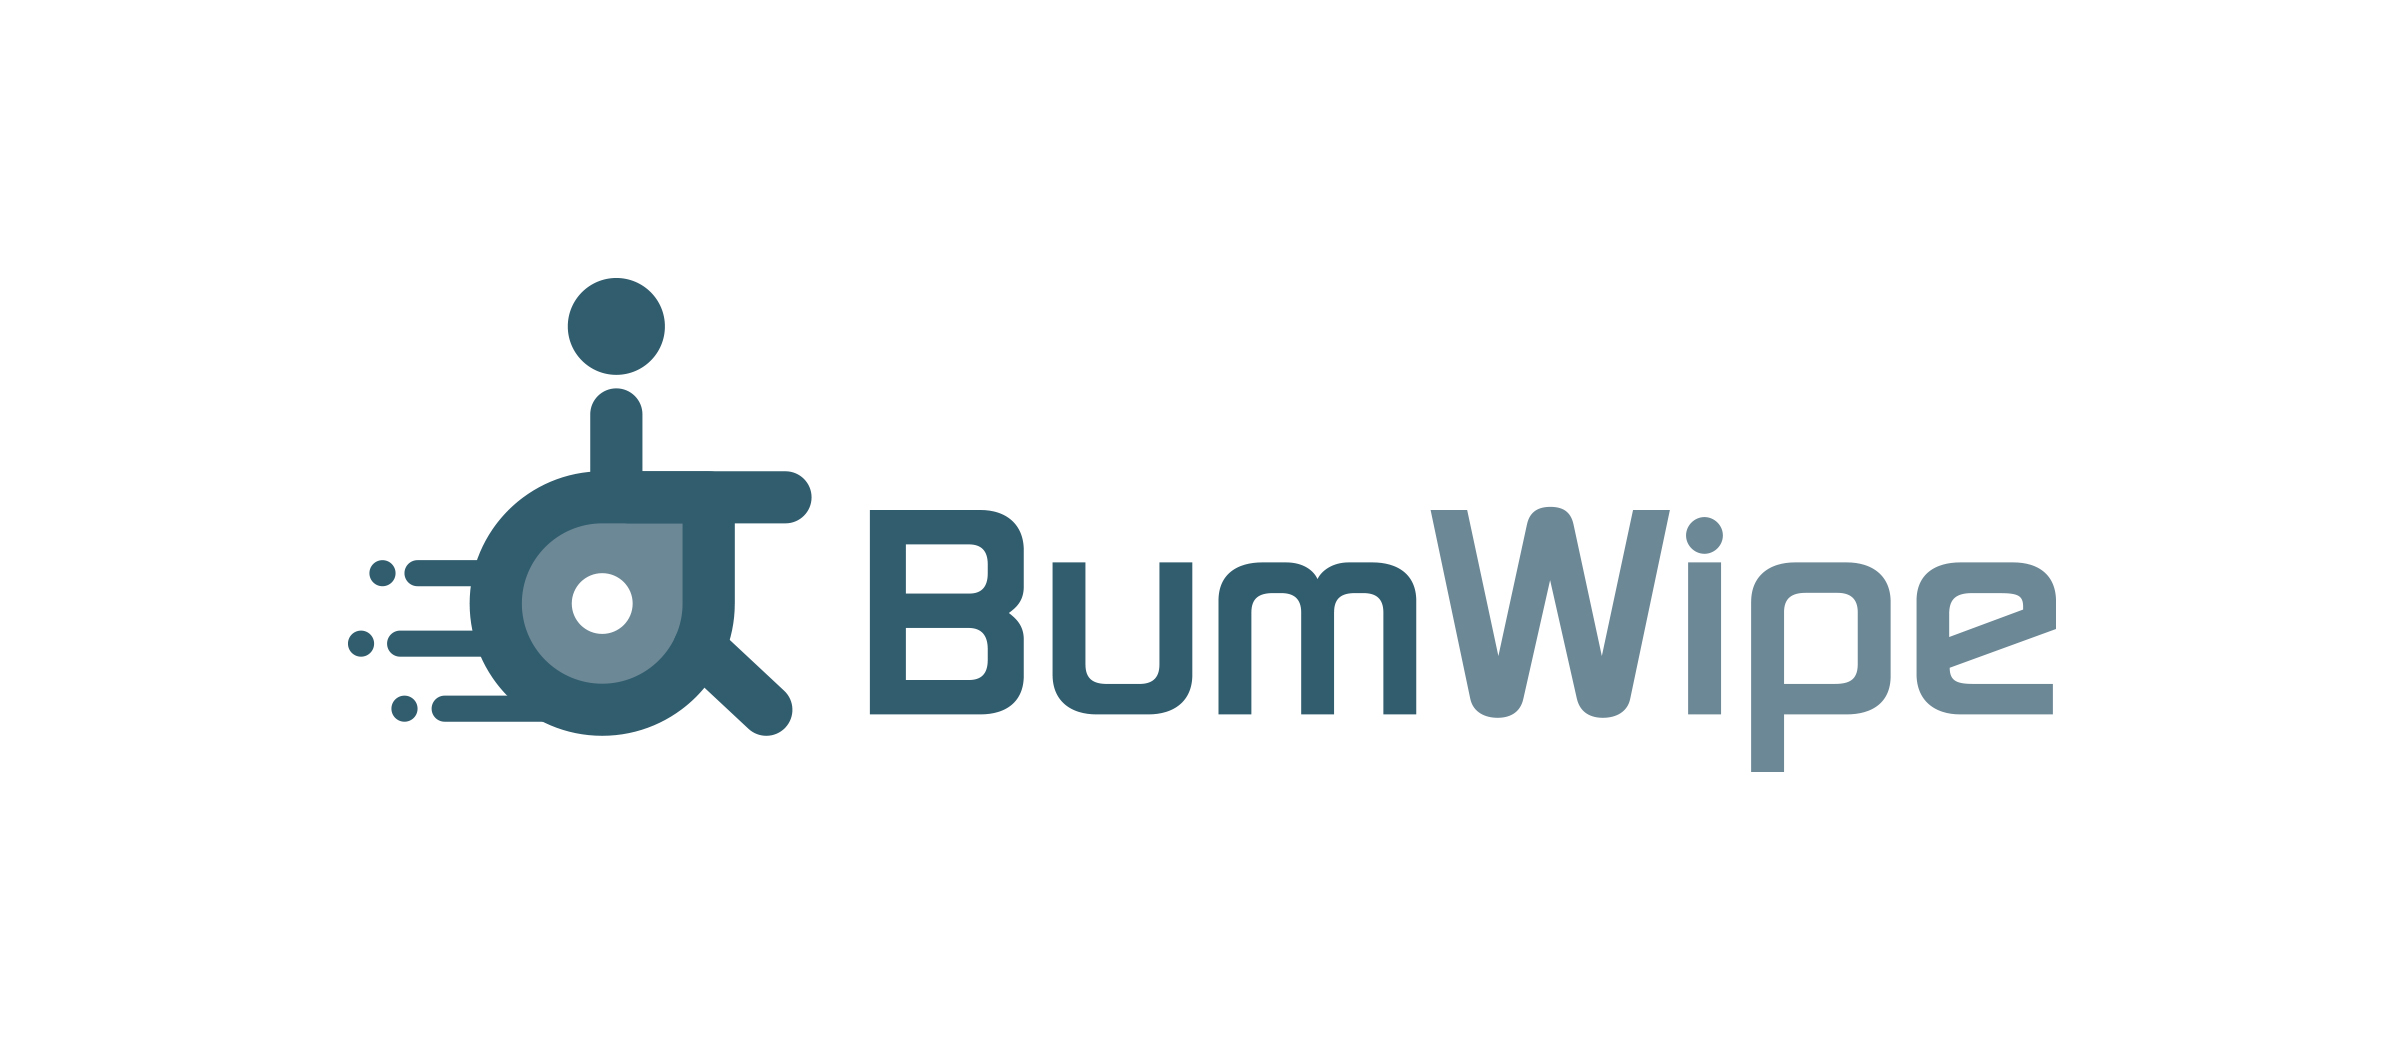 Bum Wipe is a personal hygiene invention that provides a more convenient and efficient way of cleaning your bottom without any fuss